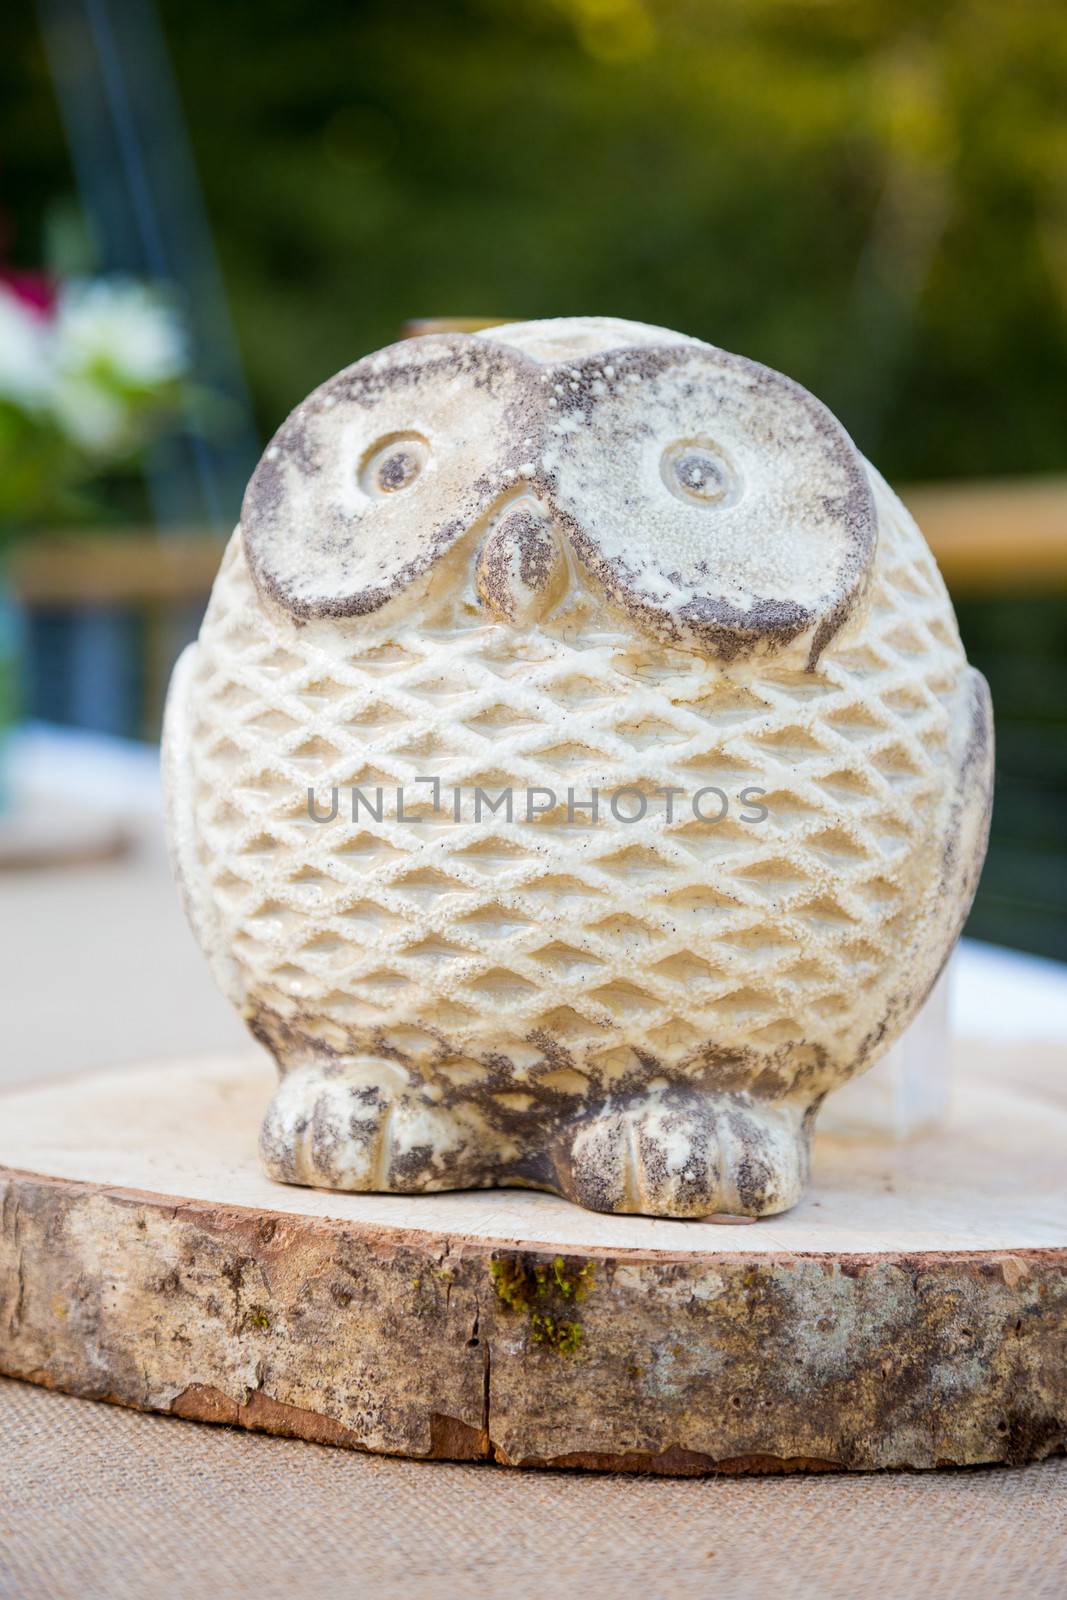 Decorations at this wedding include wooden carved owls as centerpieces for the tables.